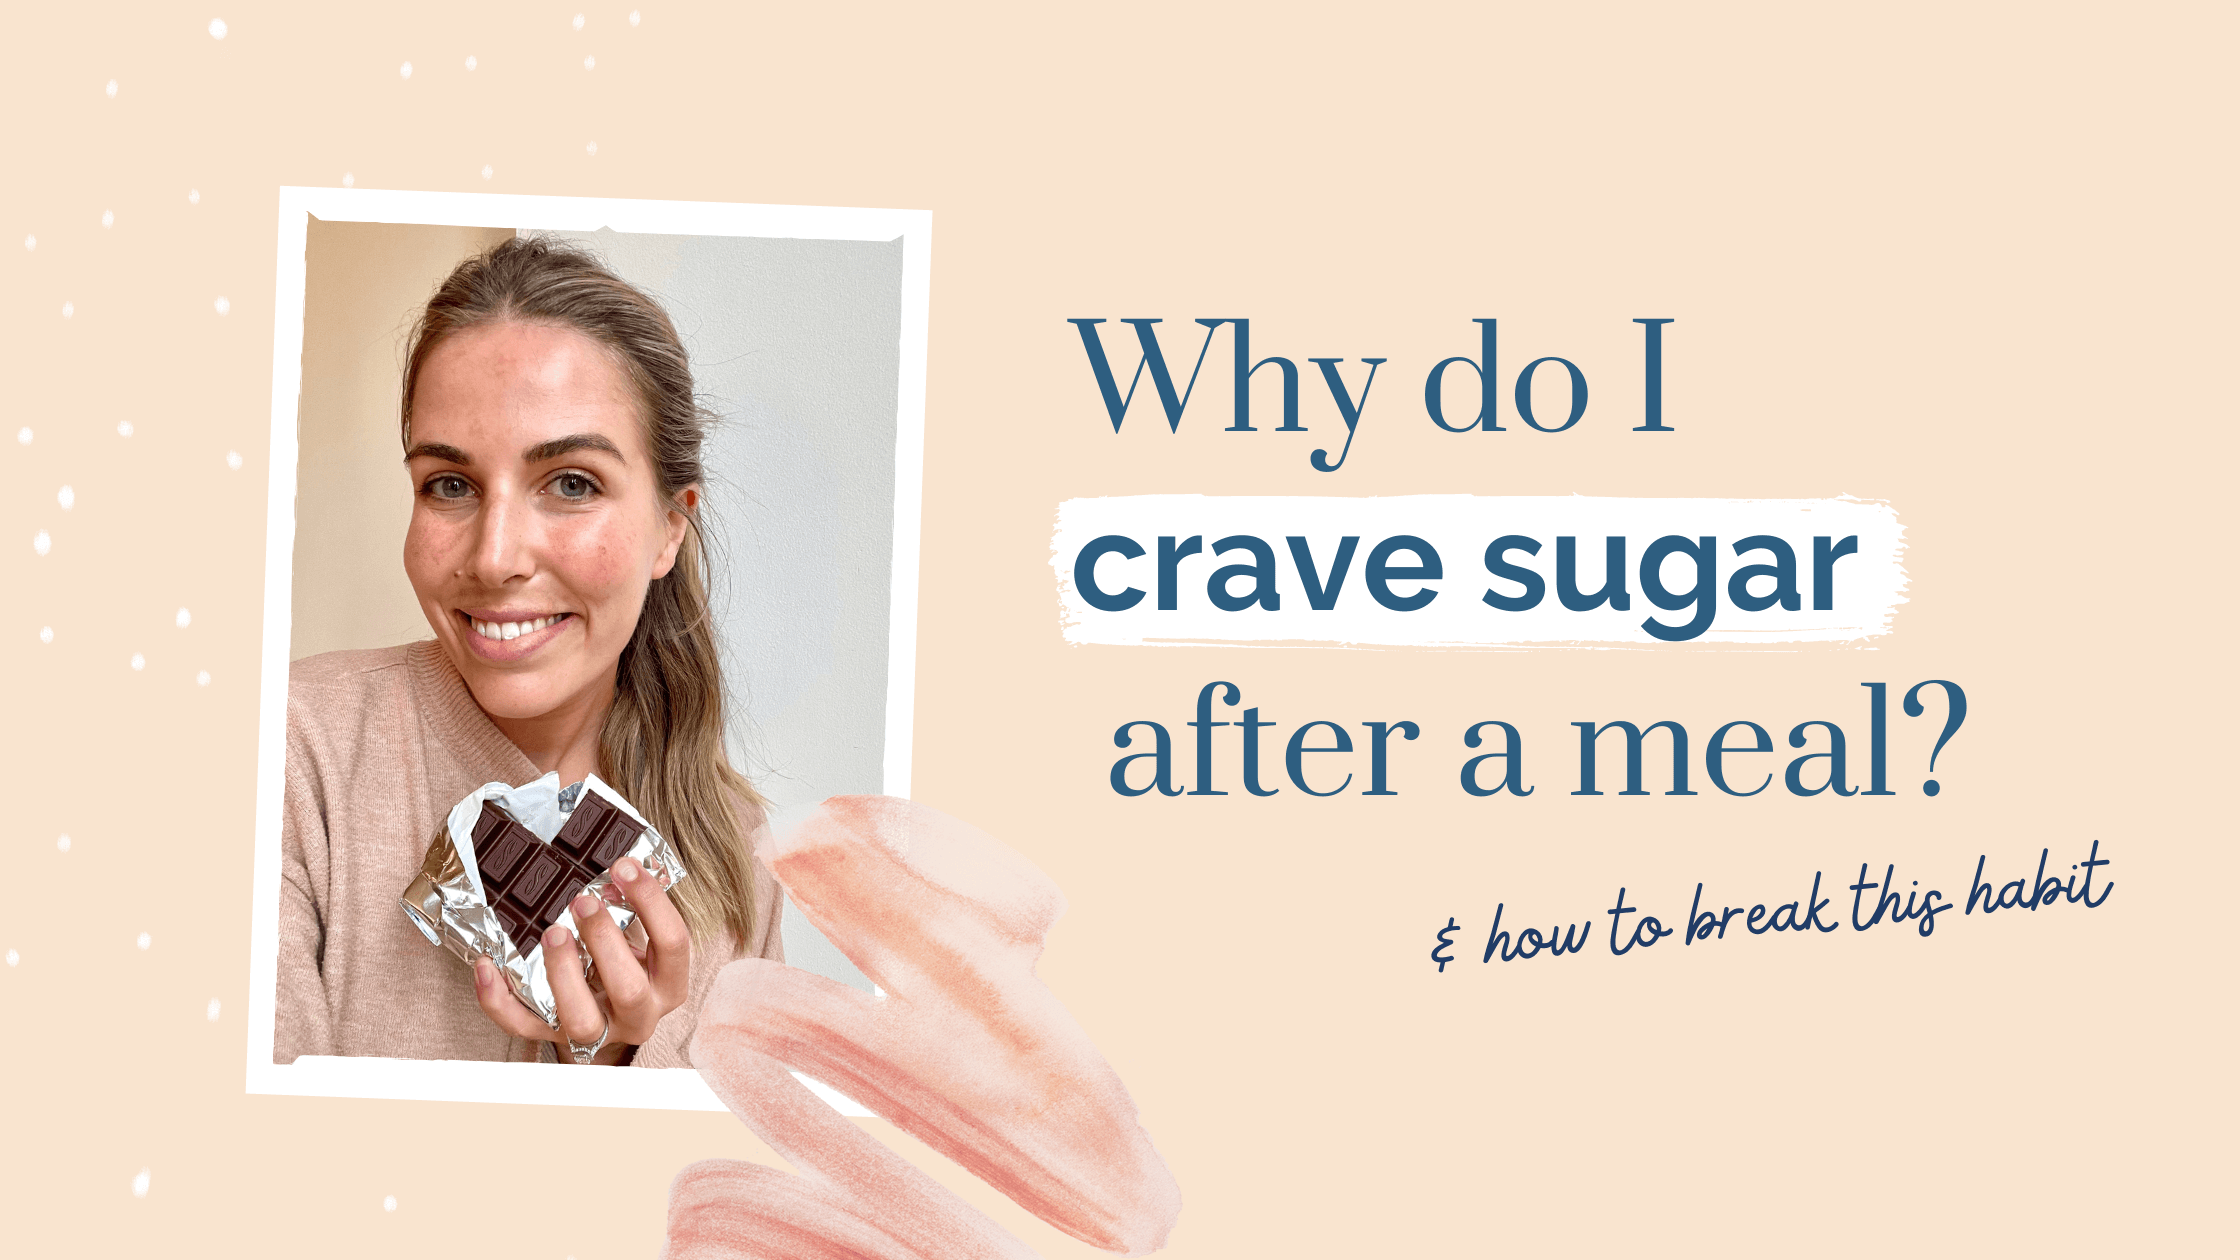 Why Do I Crave Sugar After a Meal [+ How to Break This Habit]